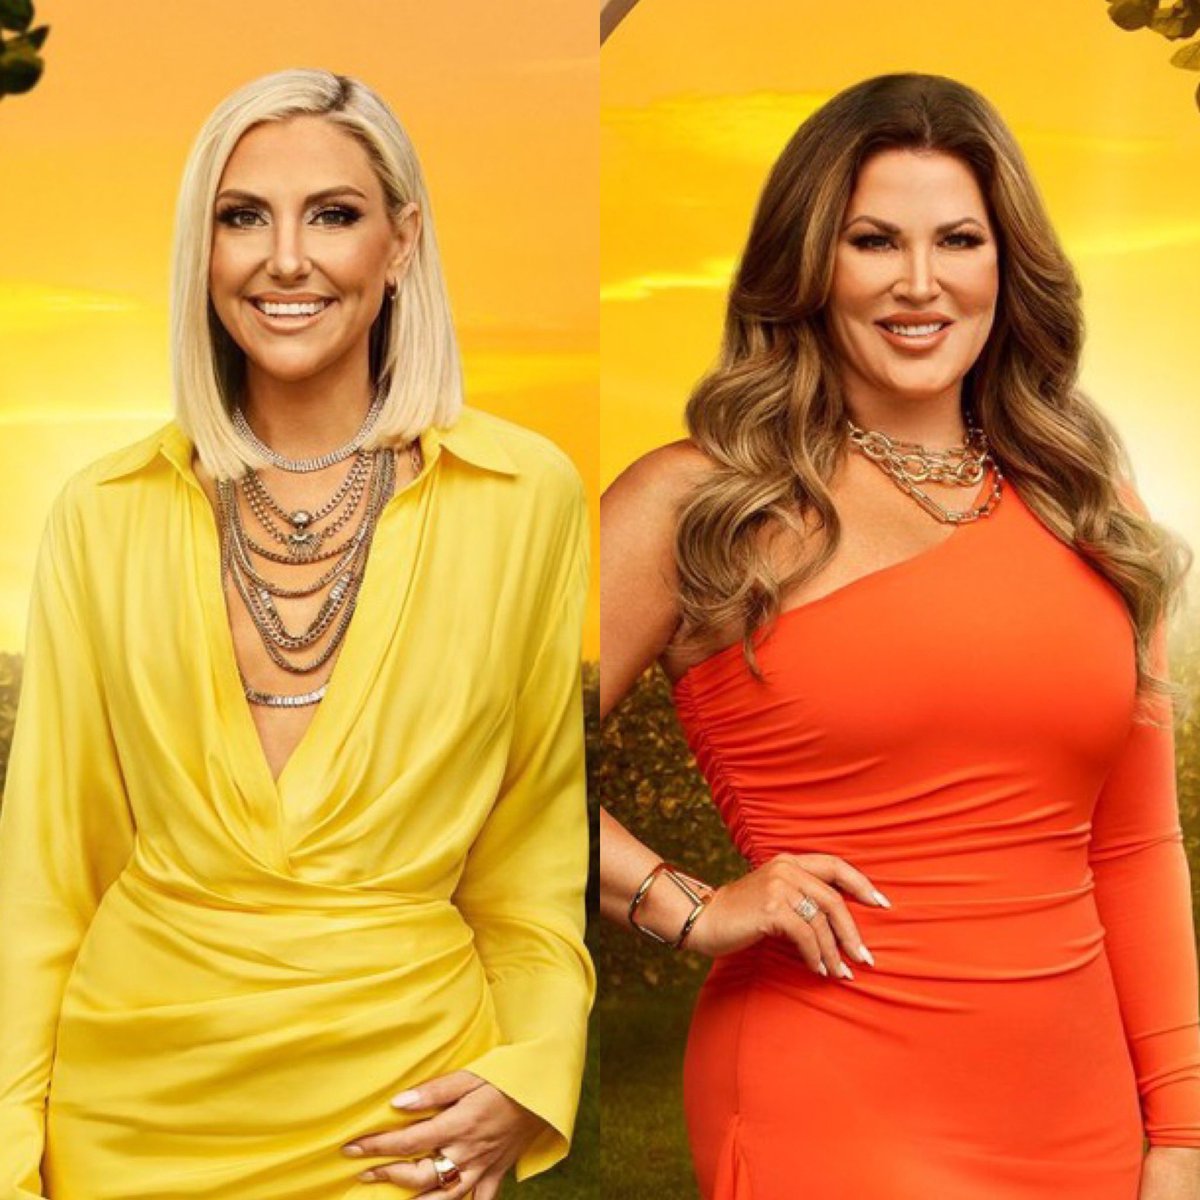 Hear me out..

Emily would thrive as a Housewife if Gina was no longer on the show. #RHOC